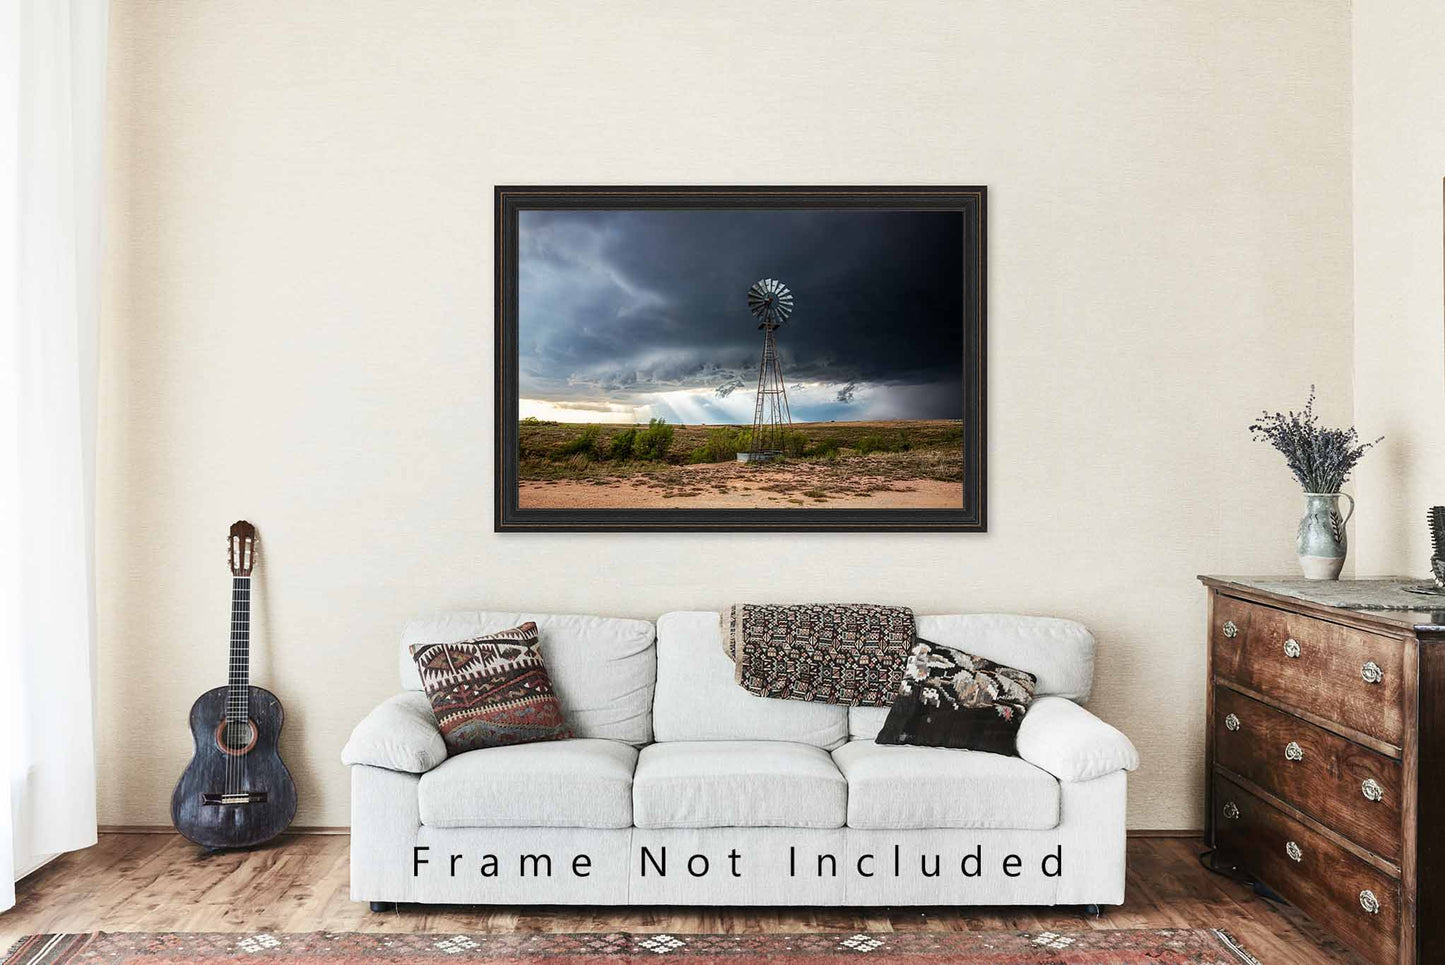 Country Photography Print - Picture of Sunbeams Breaking Through Storm and Windmill in Texas - Farmhouse Home Decor Photo Artwork